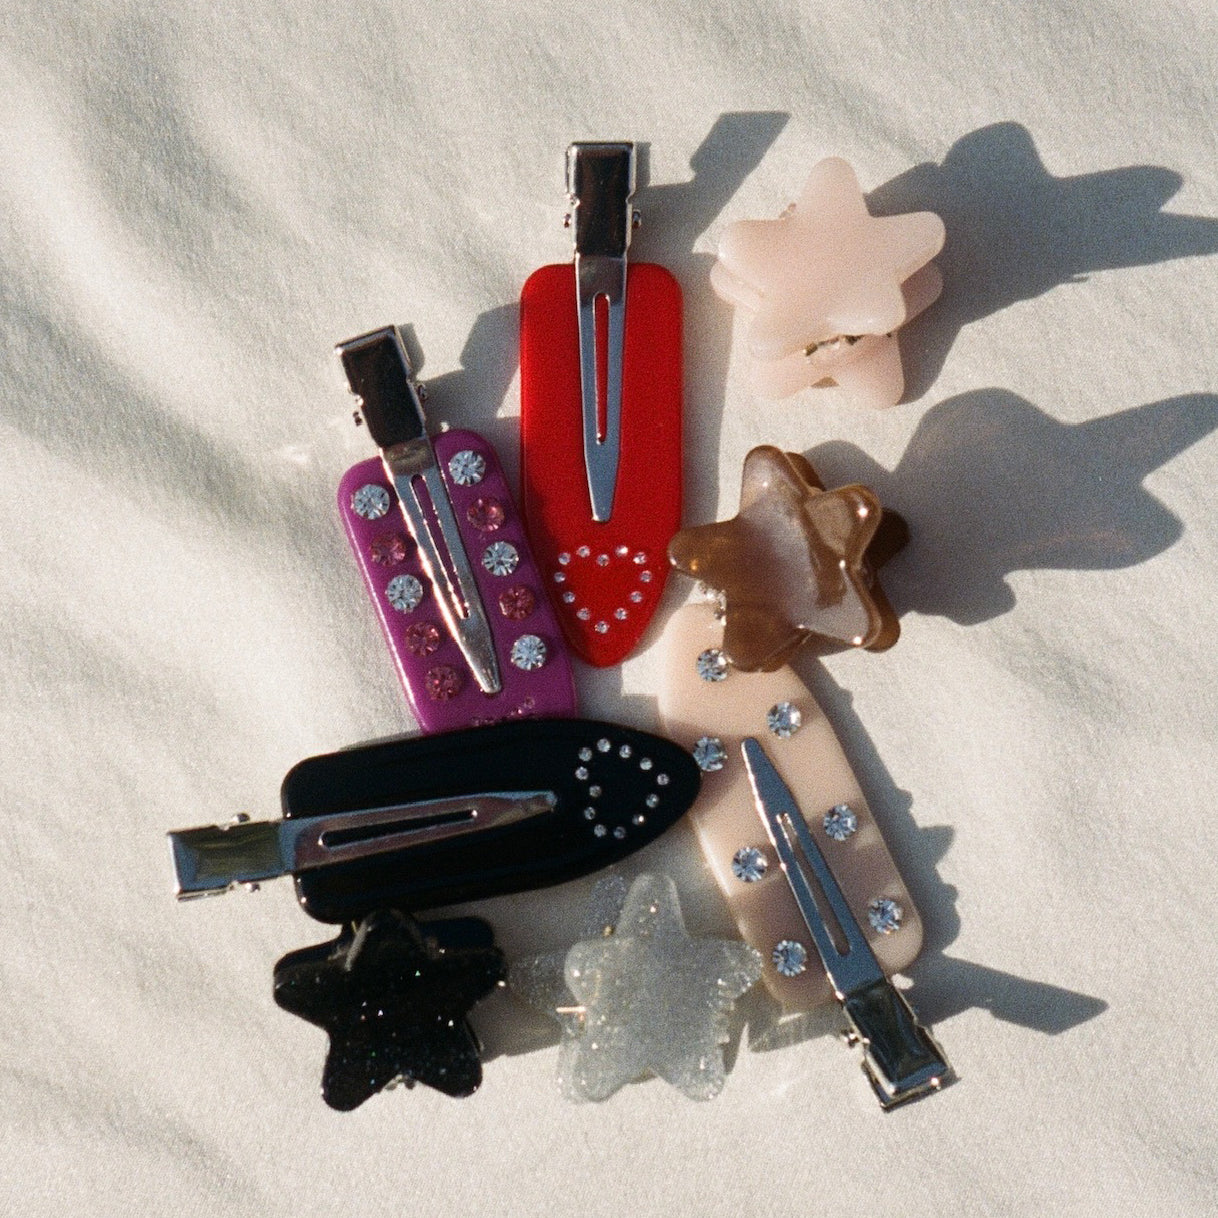 Popstar Clip in Diva with assorted hair accessories